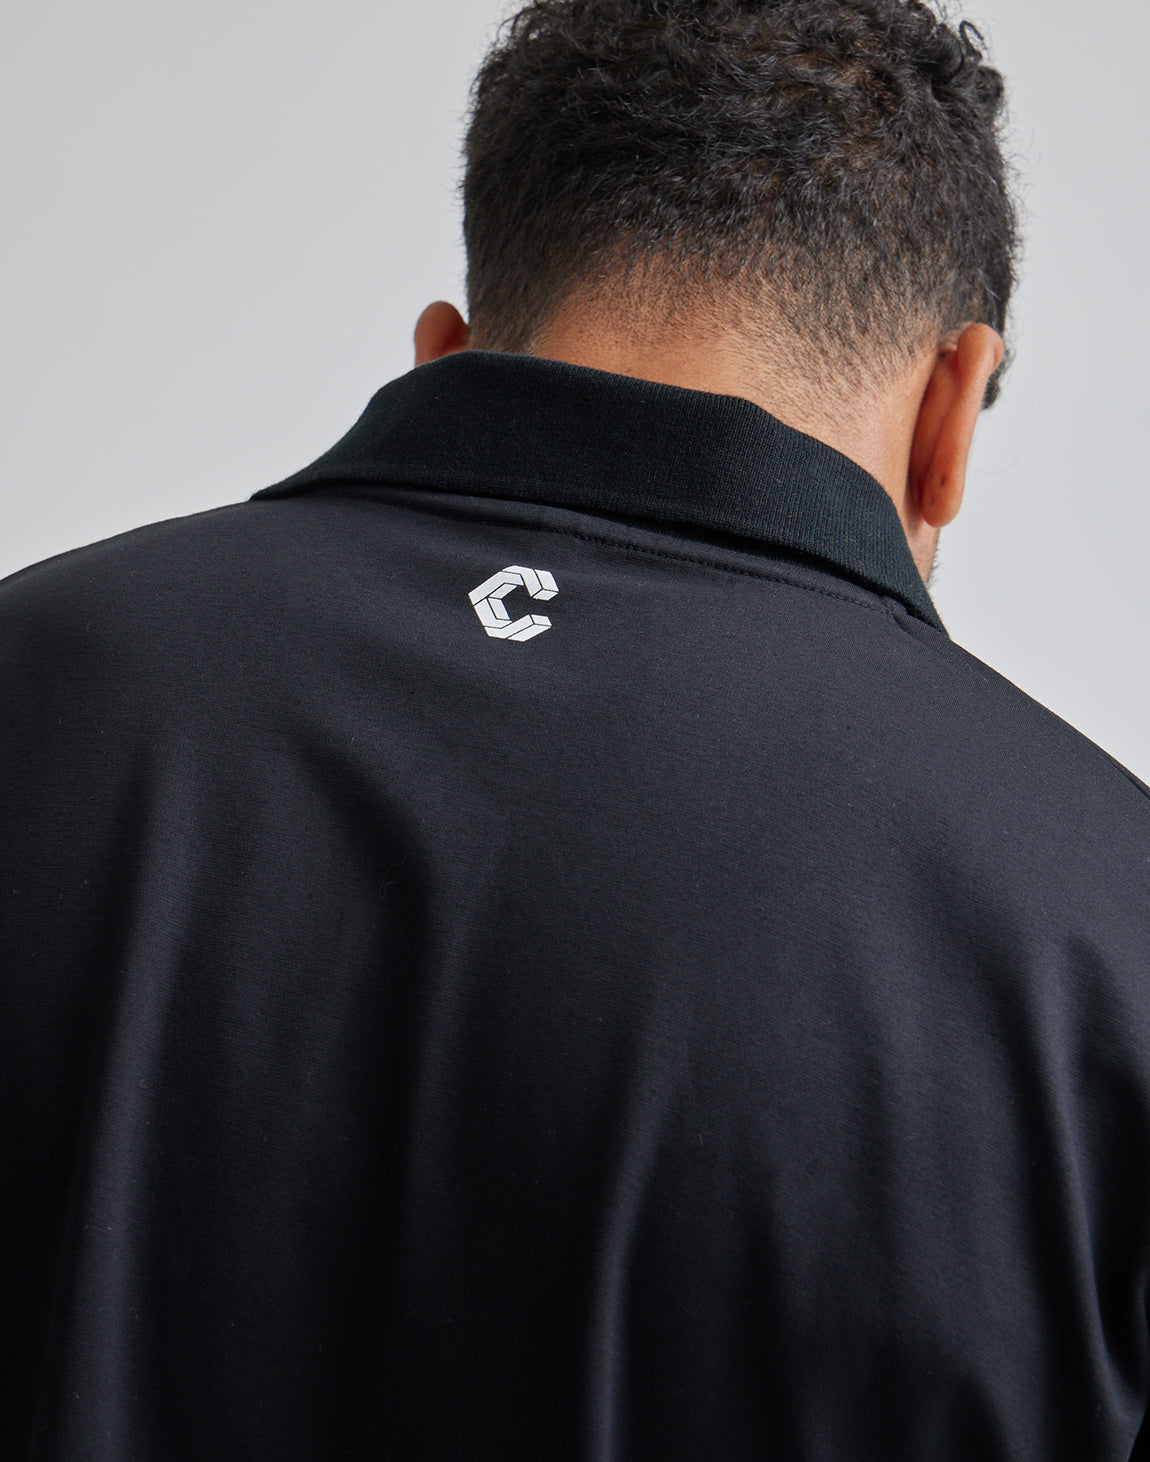 CRONOS ACTIVE OVERSIZE POLO – クロノス CRONOS Official Store